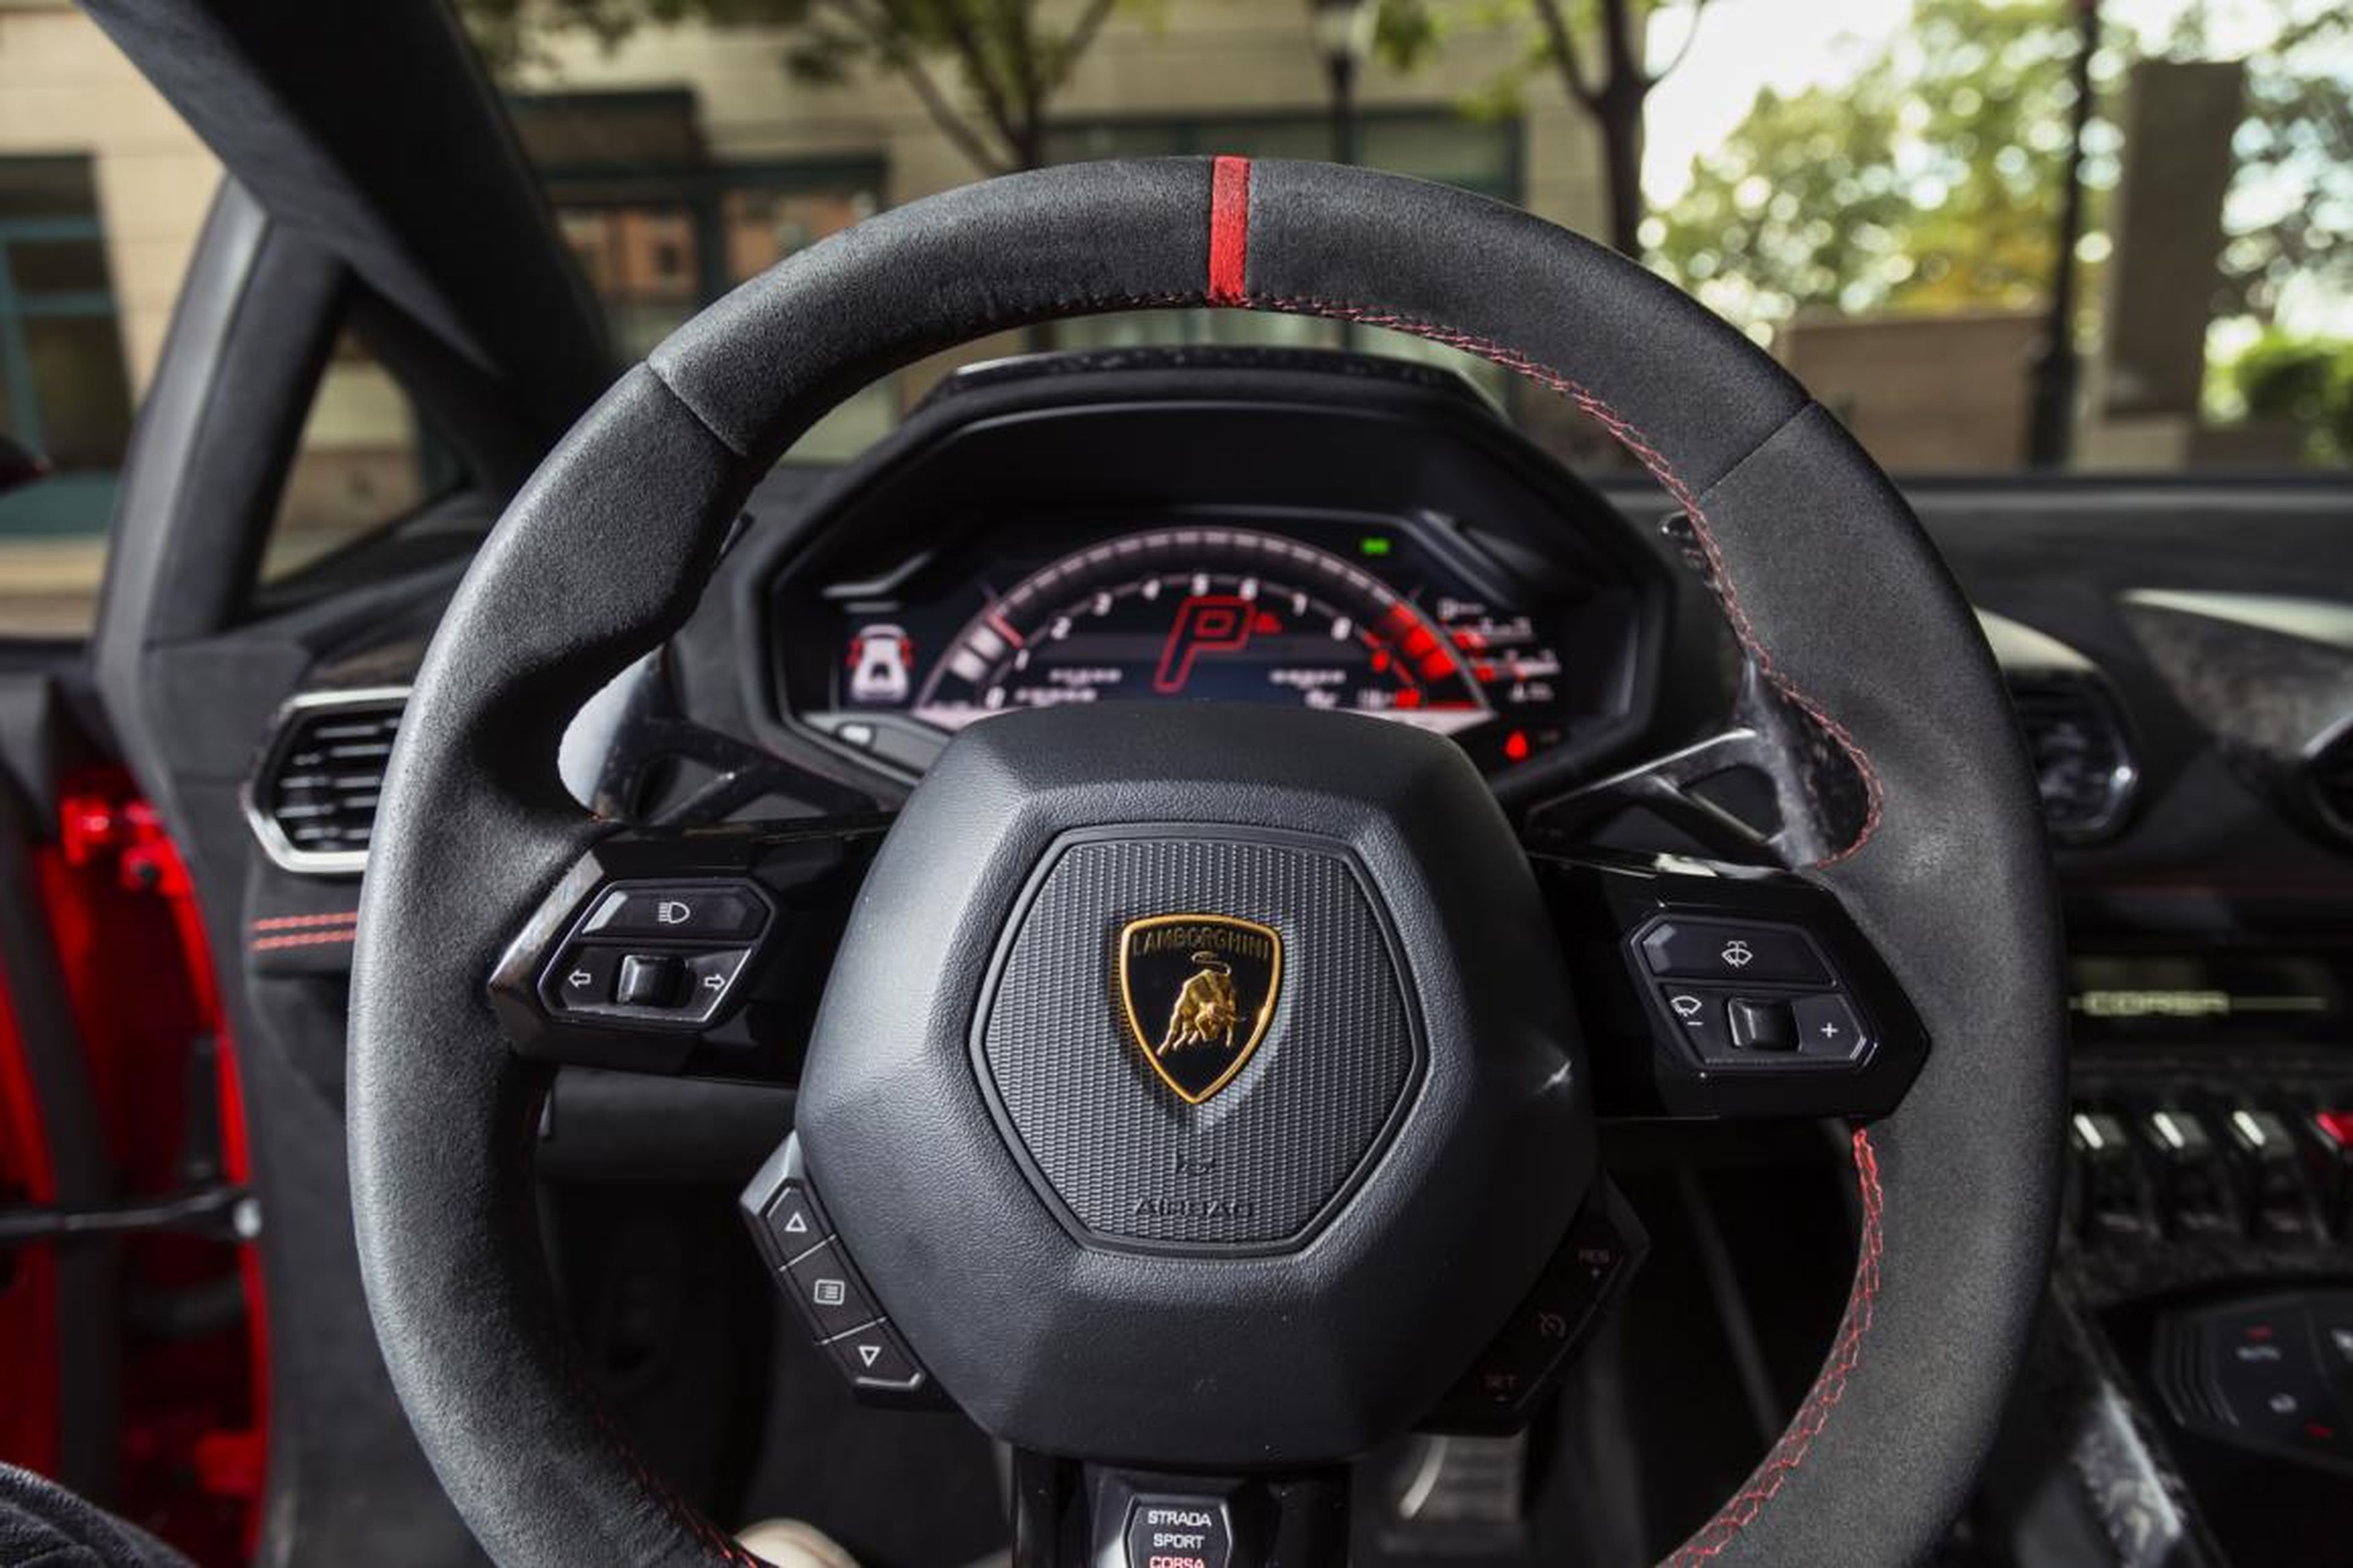 I tend to feel pretty comfortable behind the wheel of a Lambo. These cars can be crazy. But the Huracán is fairly pleasant to drive when you aren't in full-on go-fast mode. The transmission is a banging seven-speed dual-clutch